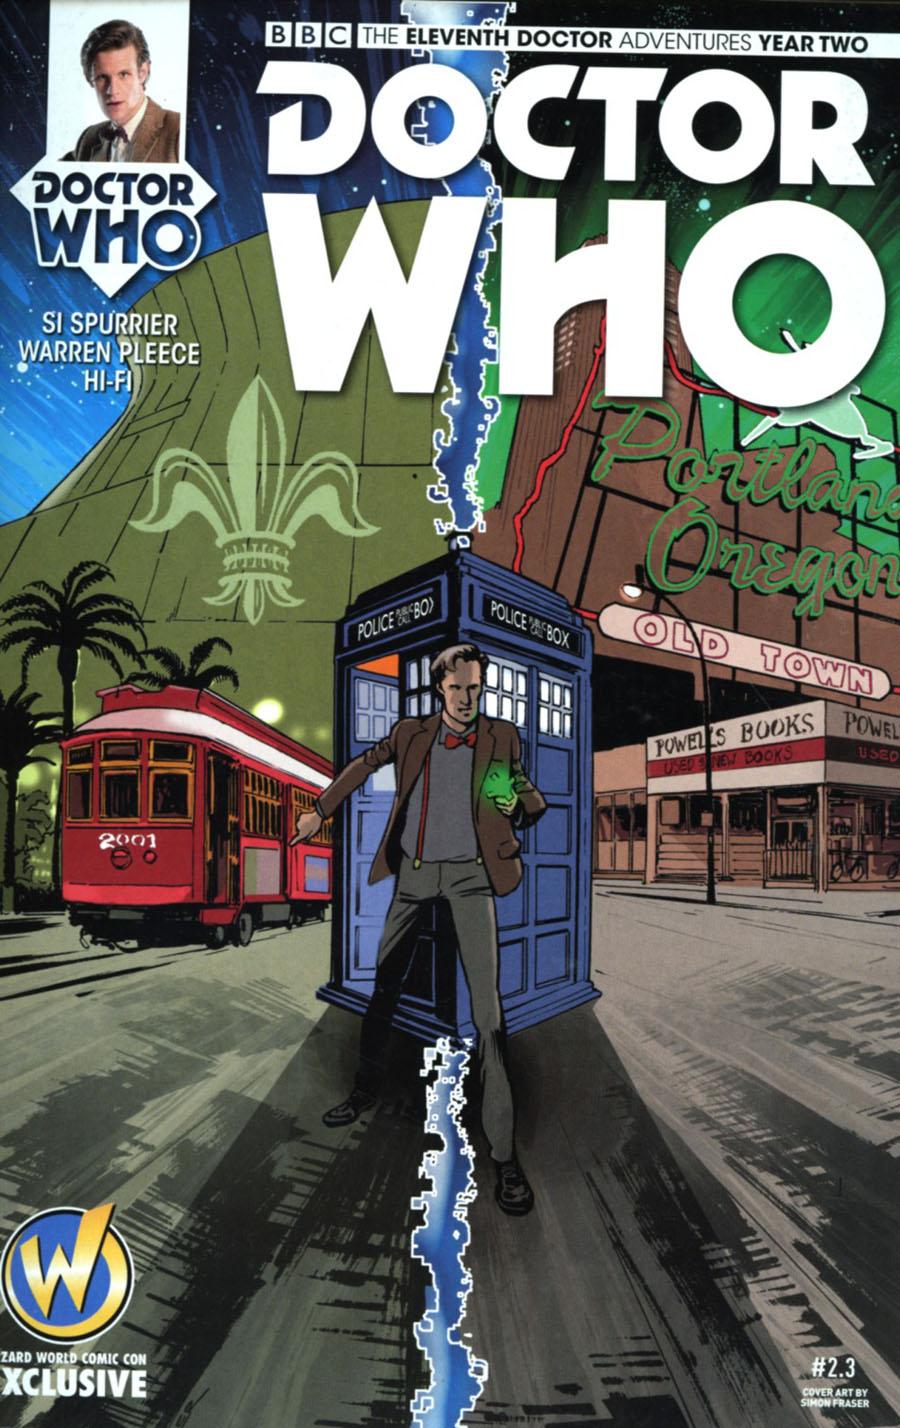 Doctor Who 11th Doctor Year Two Vol. 1 #3